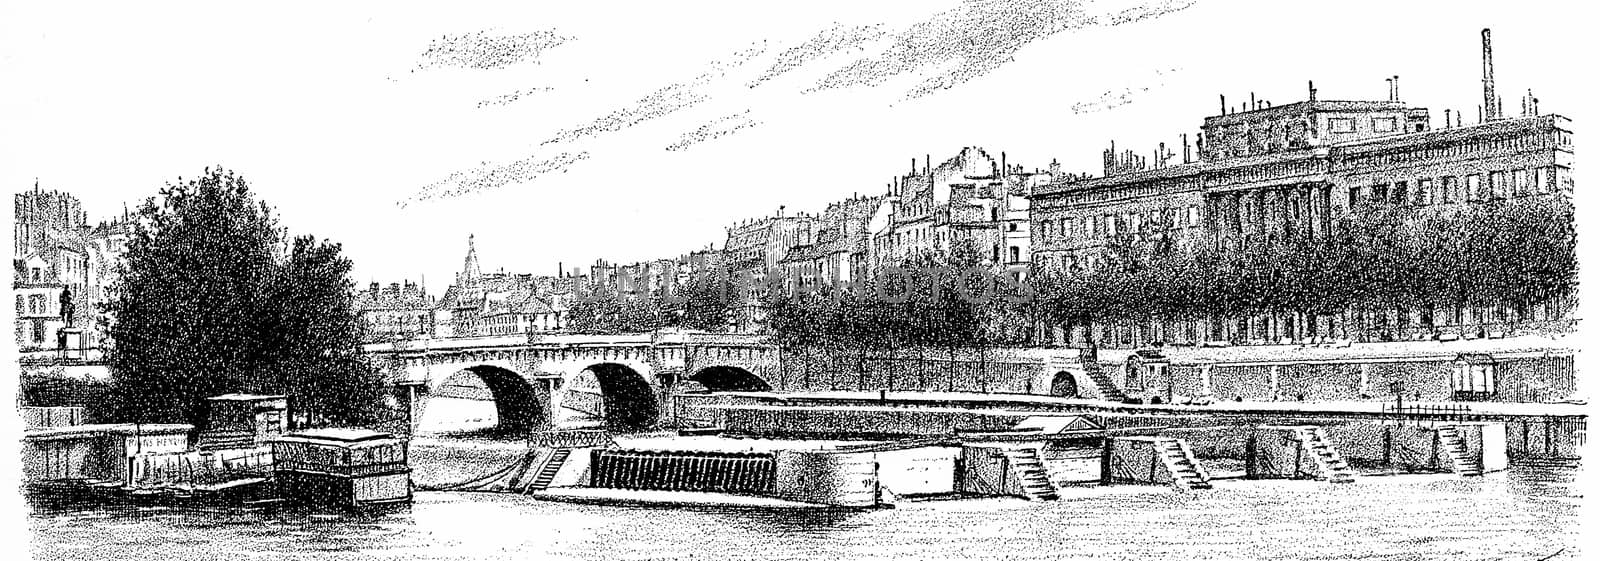 The Pont Neuf, the sluice and currency, vintage engraved illustration. Paris - Auguste VITU – 1890.